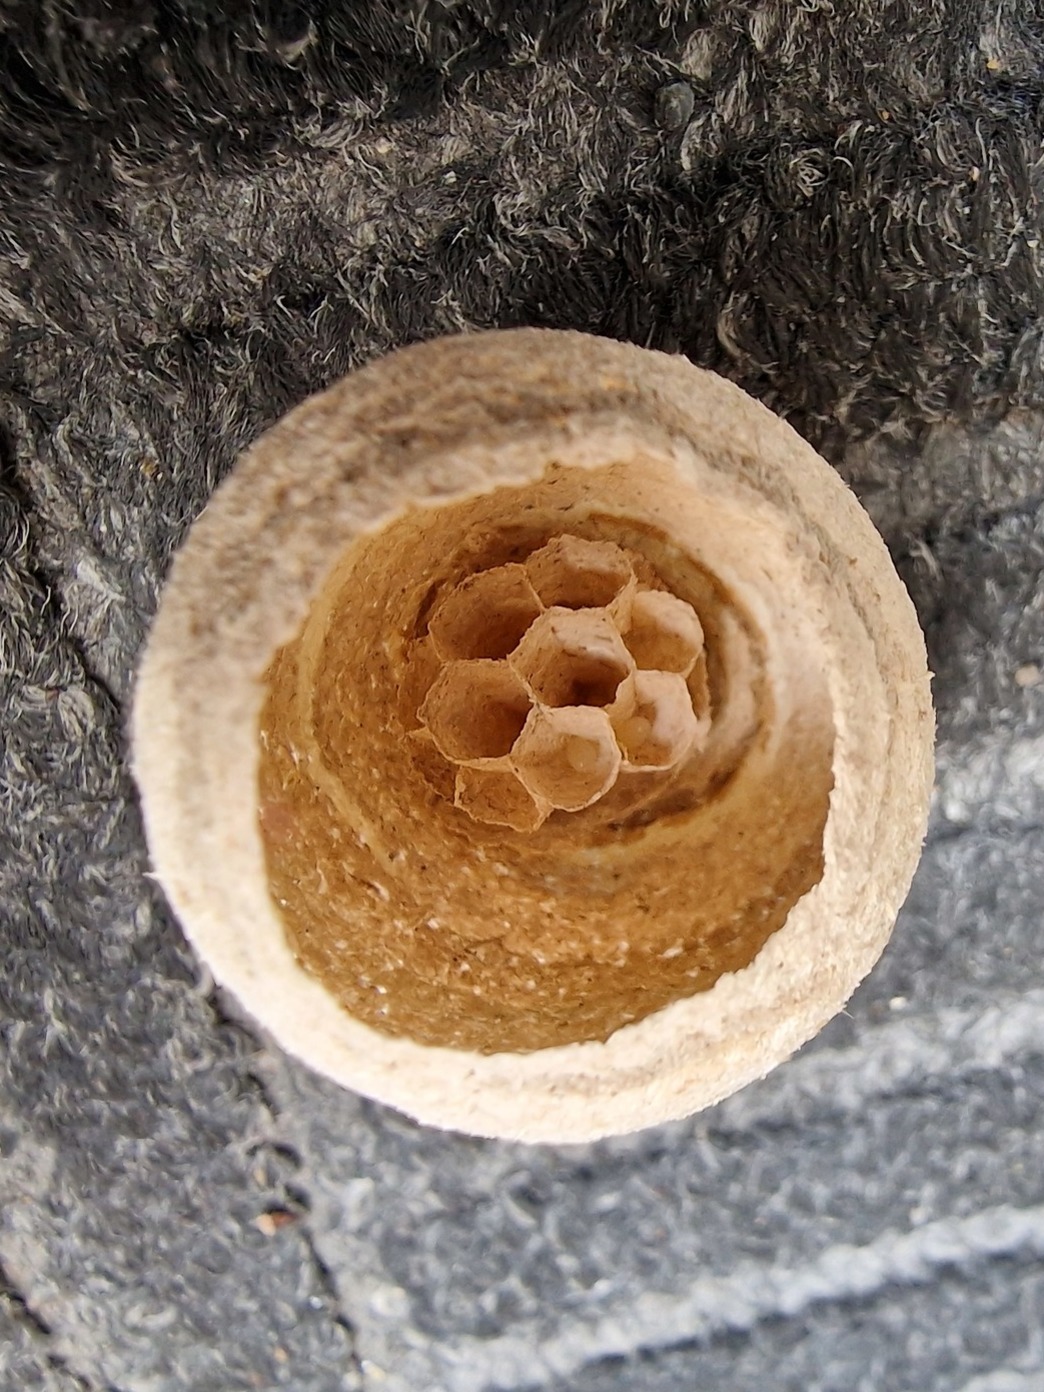 Small wasp nest